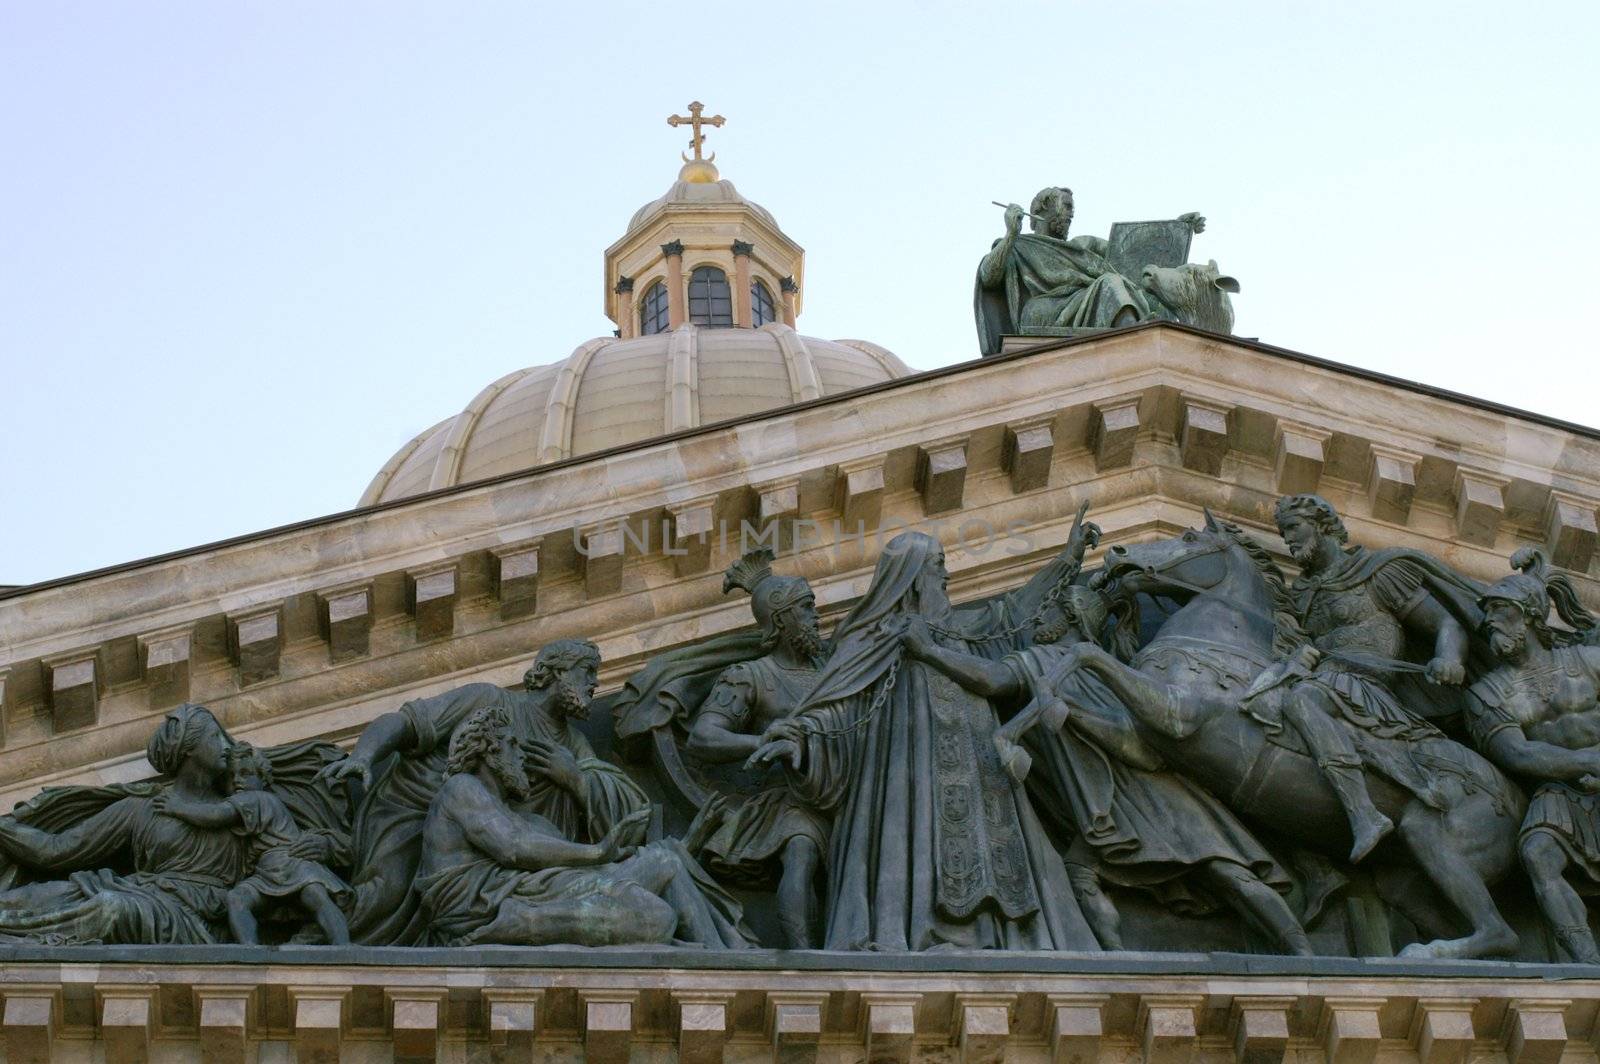 The roof of St. Isaac's Cathedral in Saint Petersburg.